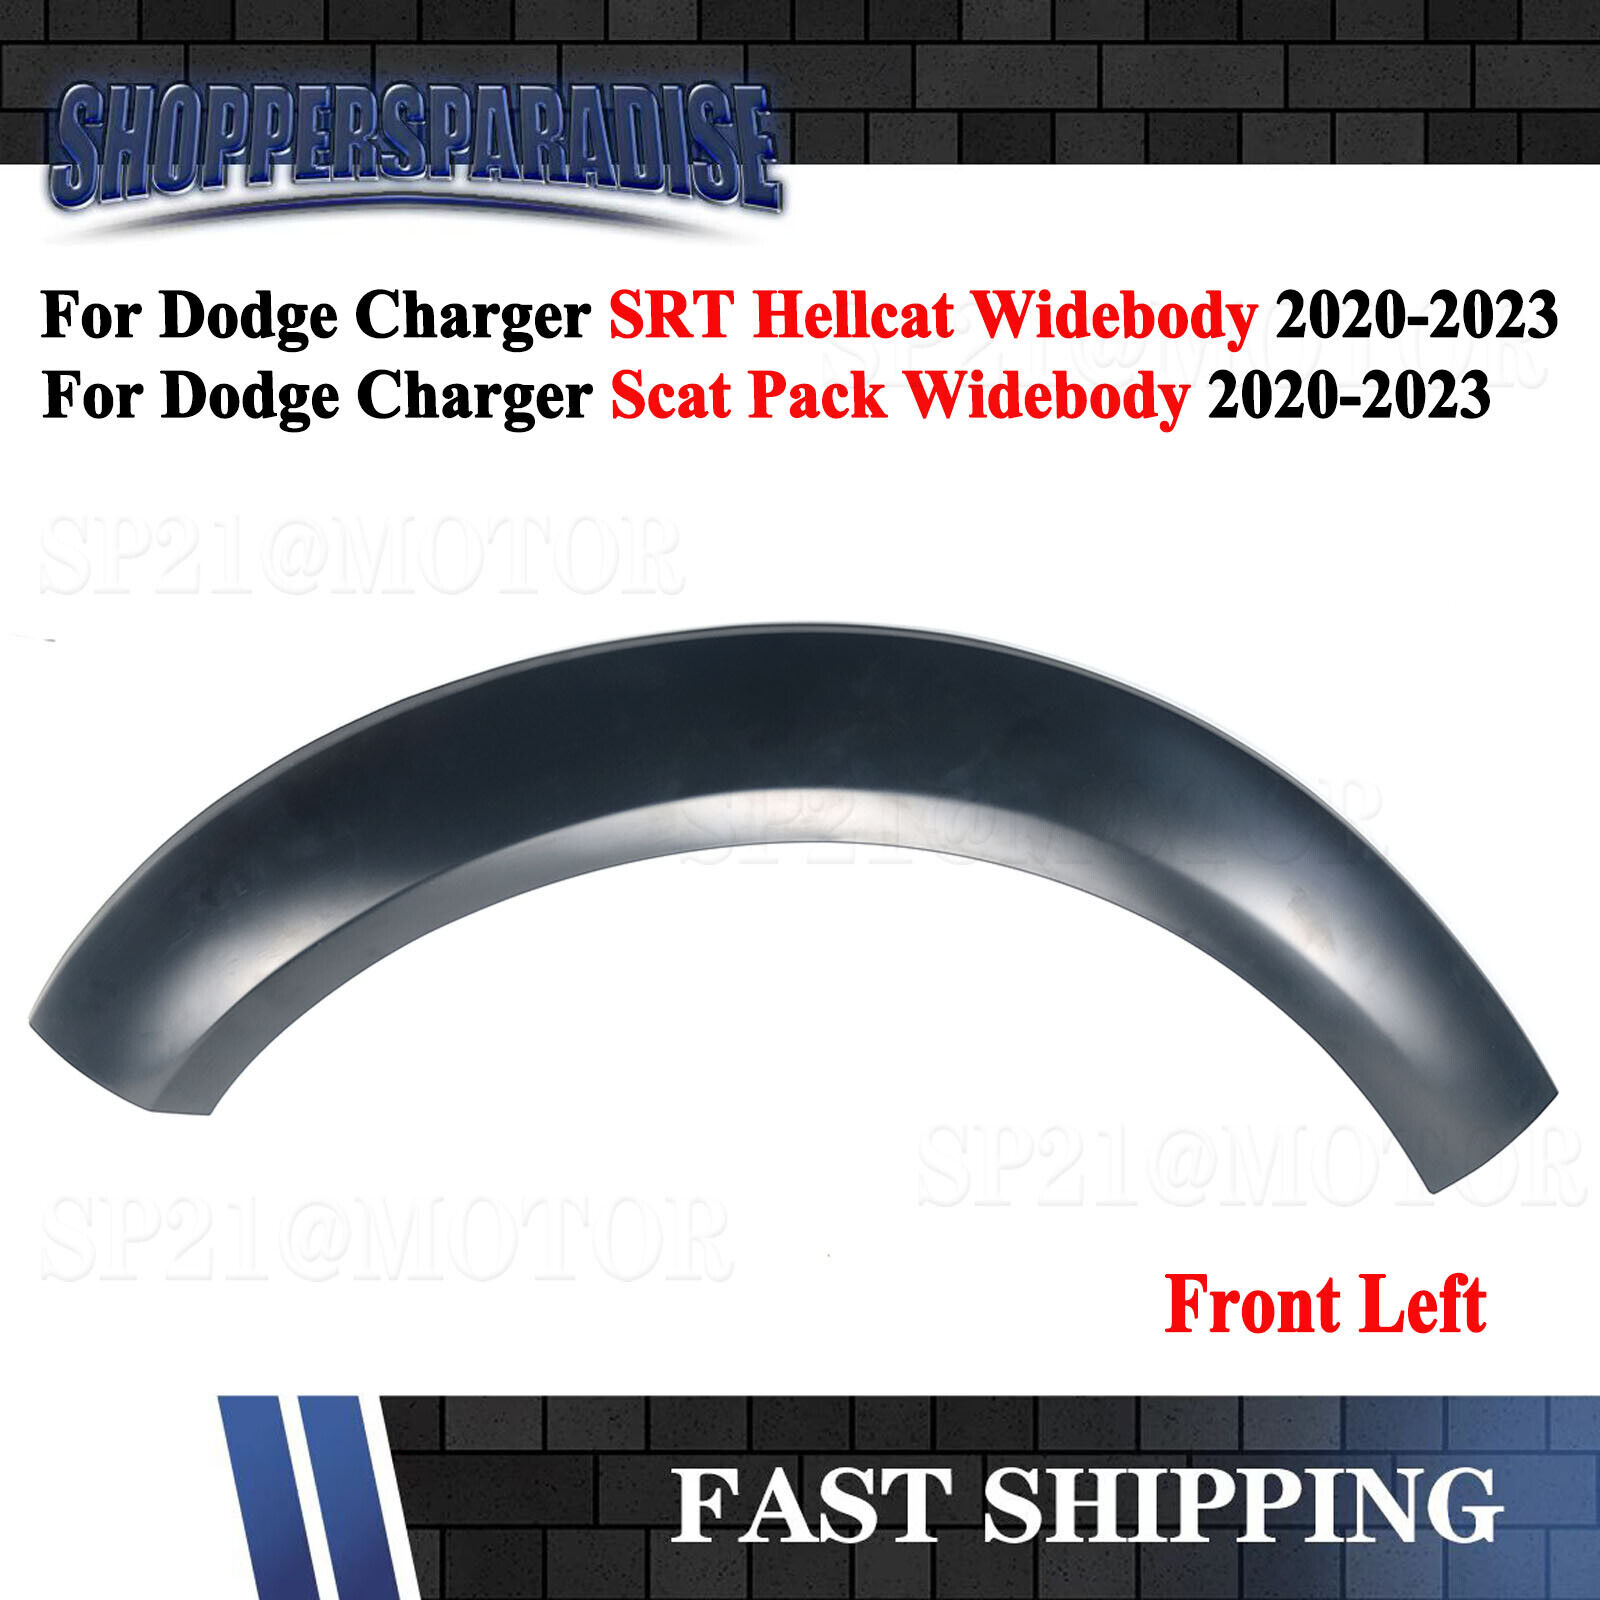 For Dodge Charger SRT Hellcat Widebody 20-23 Front Left Fender Flare Replacement